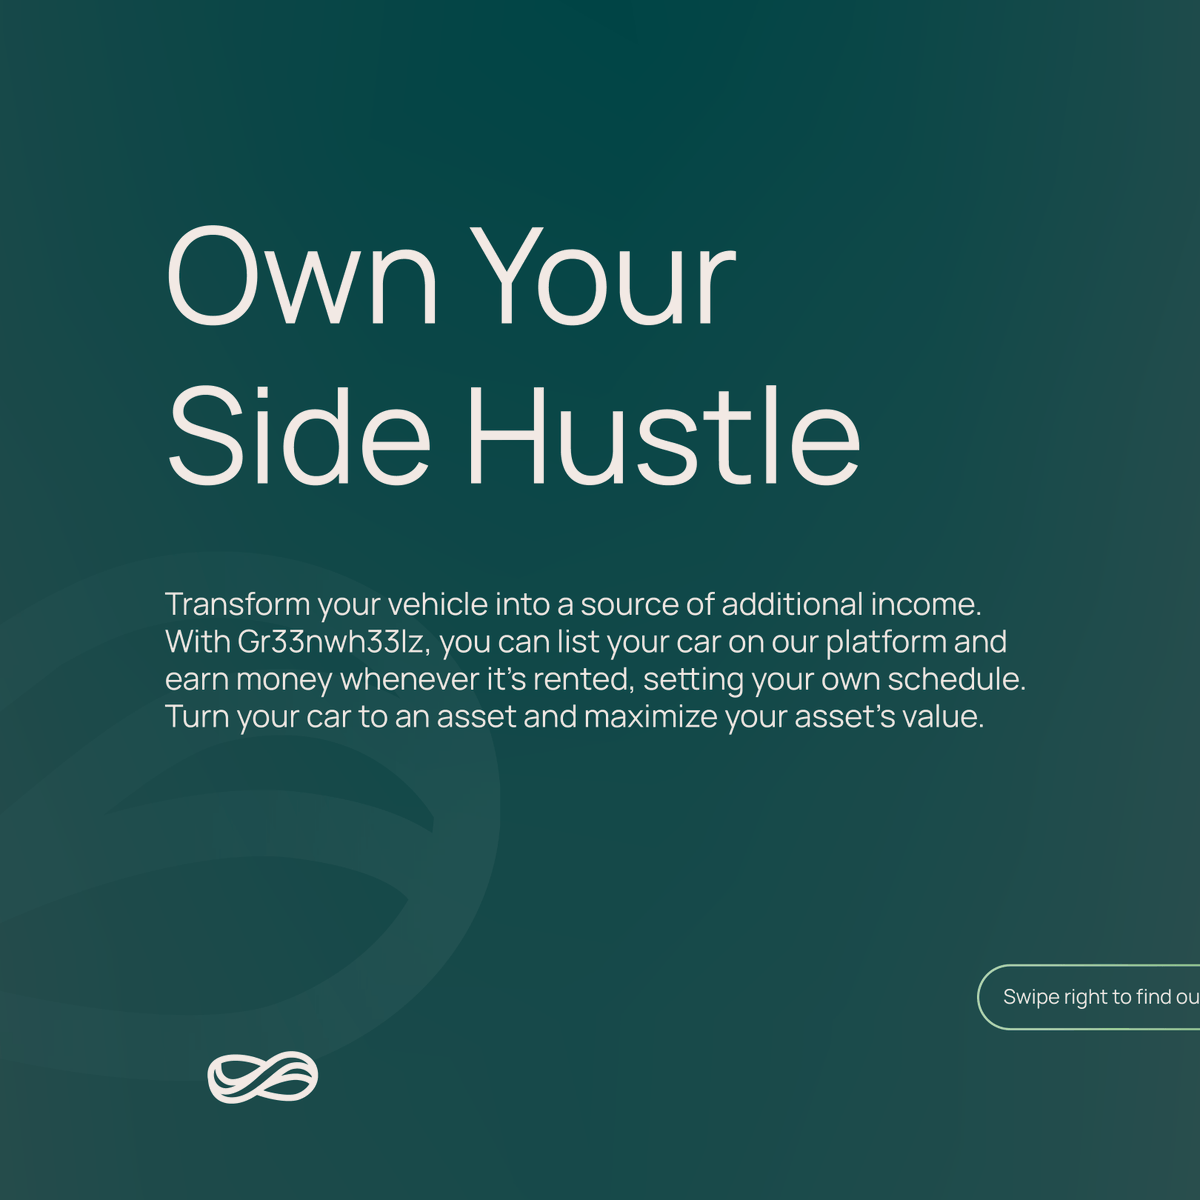 Turn your car into a money-making asset! 

We're launching a platform that makes it easy to list your car for rentals. 

#startup #sidehustle #carsharing